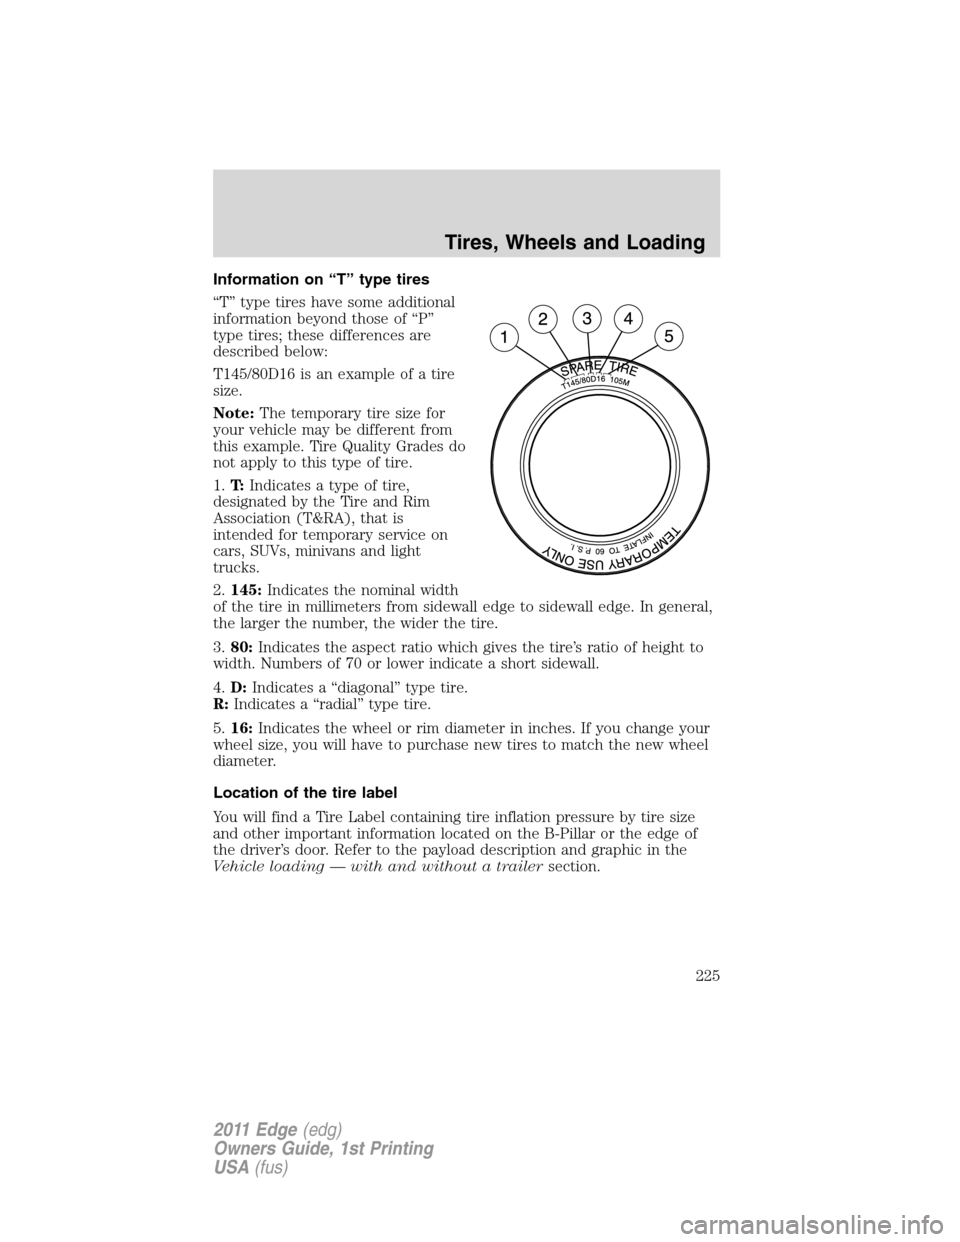 FORD EDGE 2011 1.G Owners Manual Information on “T” type tires
“T” type tires have some additional
information beyond those of “P”
type tires; these differences are
described below:
T145/80D16 is an example of a tire
size